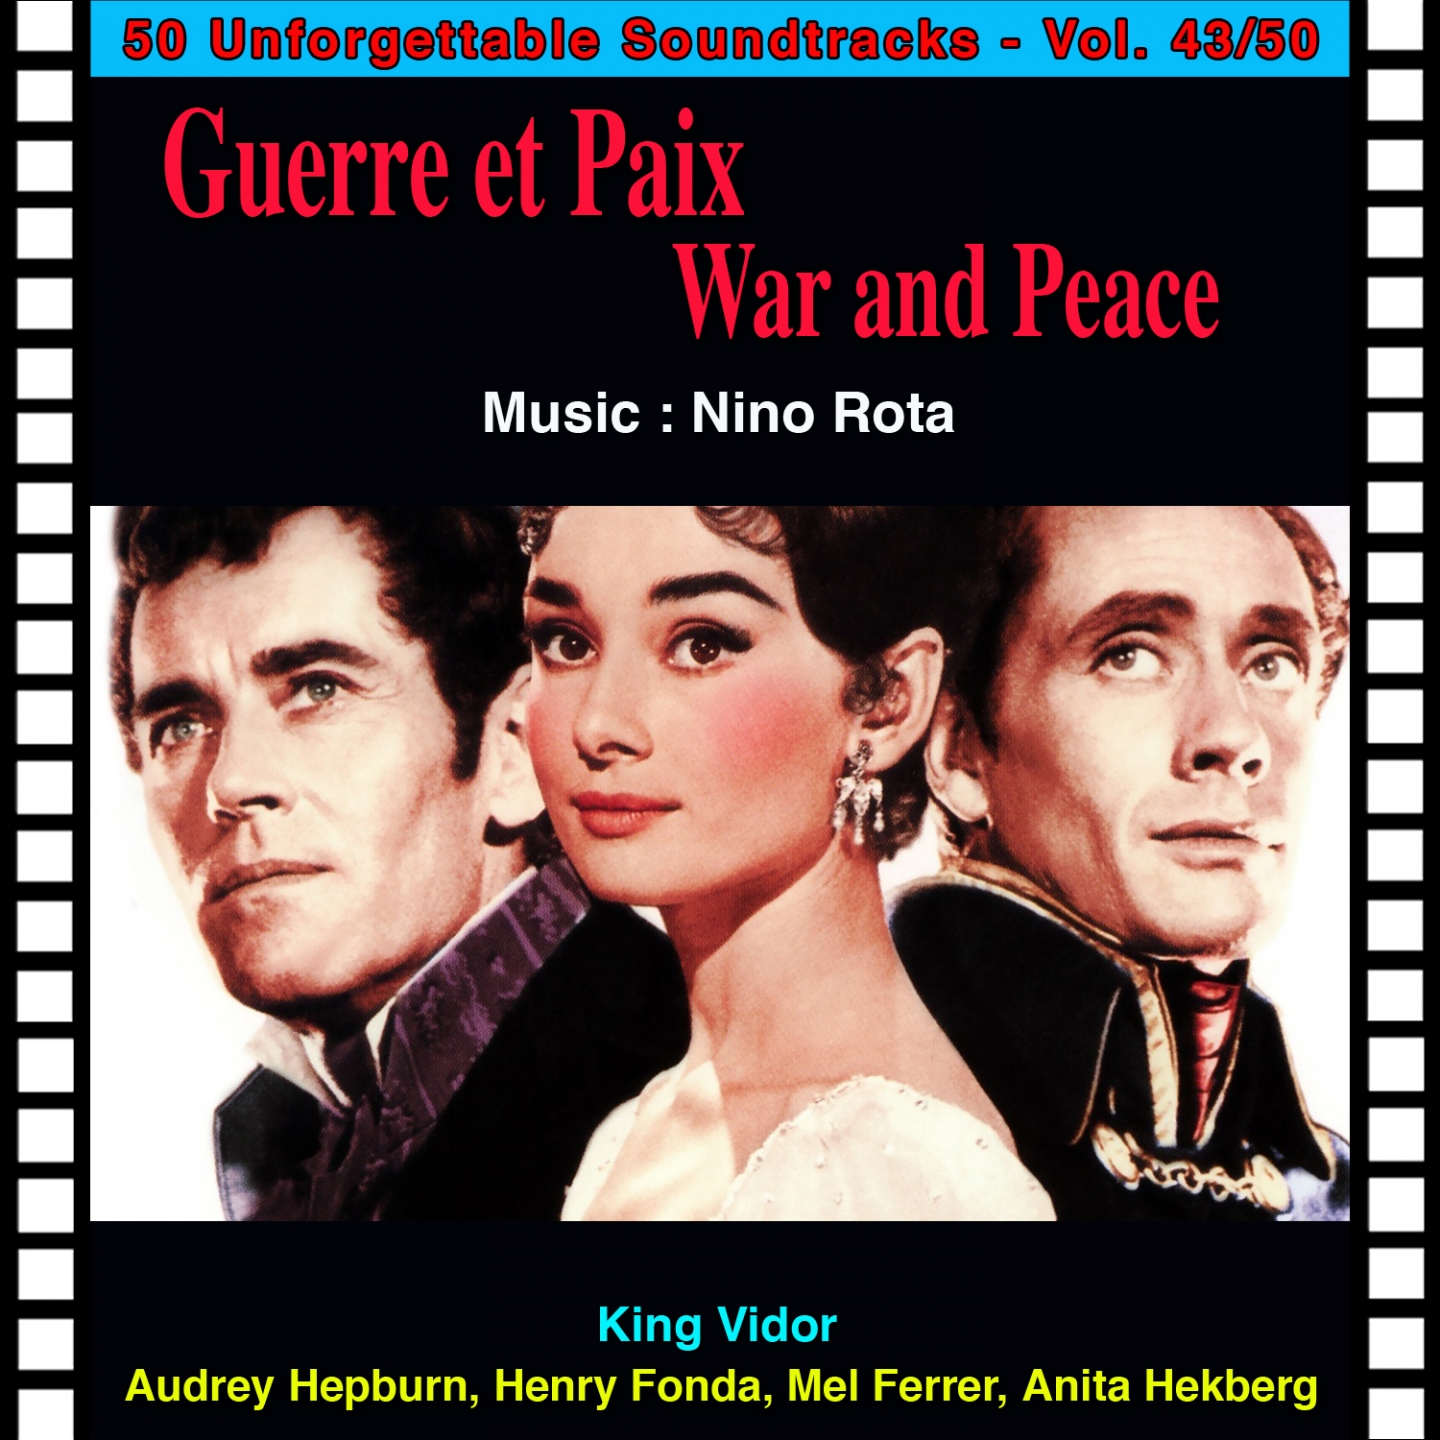 The Charge of the Cavalry and the Wounded (Guerre Et Paix - War and Peace)